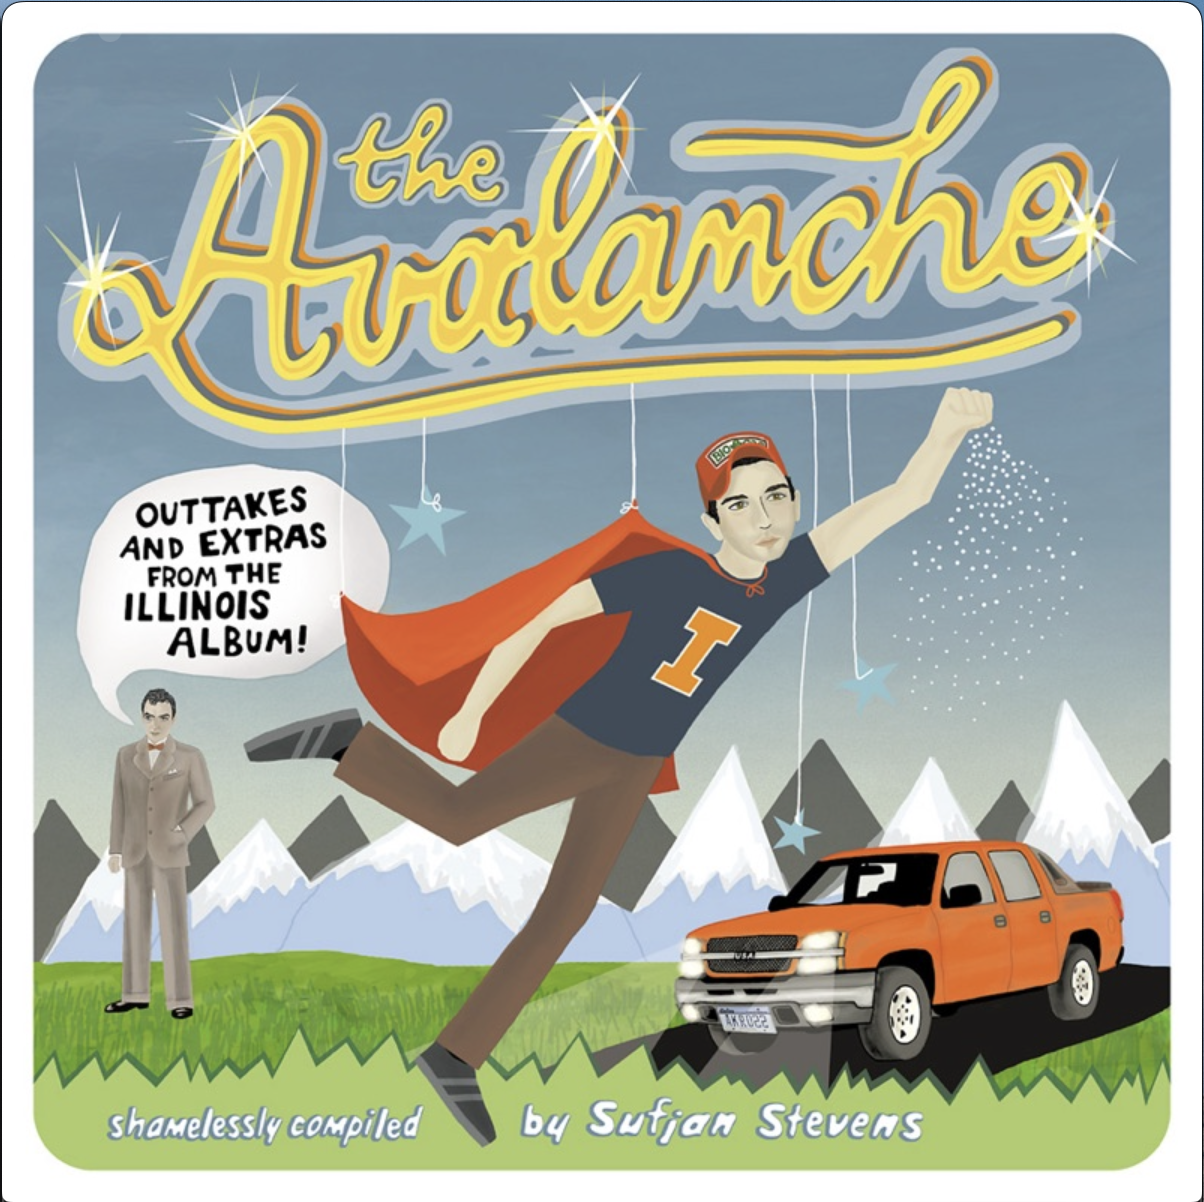 Album Cover for The Avalanche: Outtakes and extras from the Illinois Album! shamelessly compiled by Sufjan Stevens